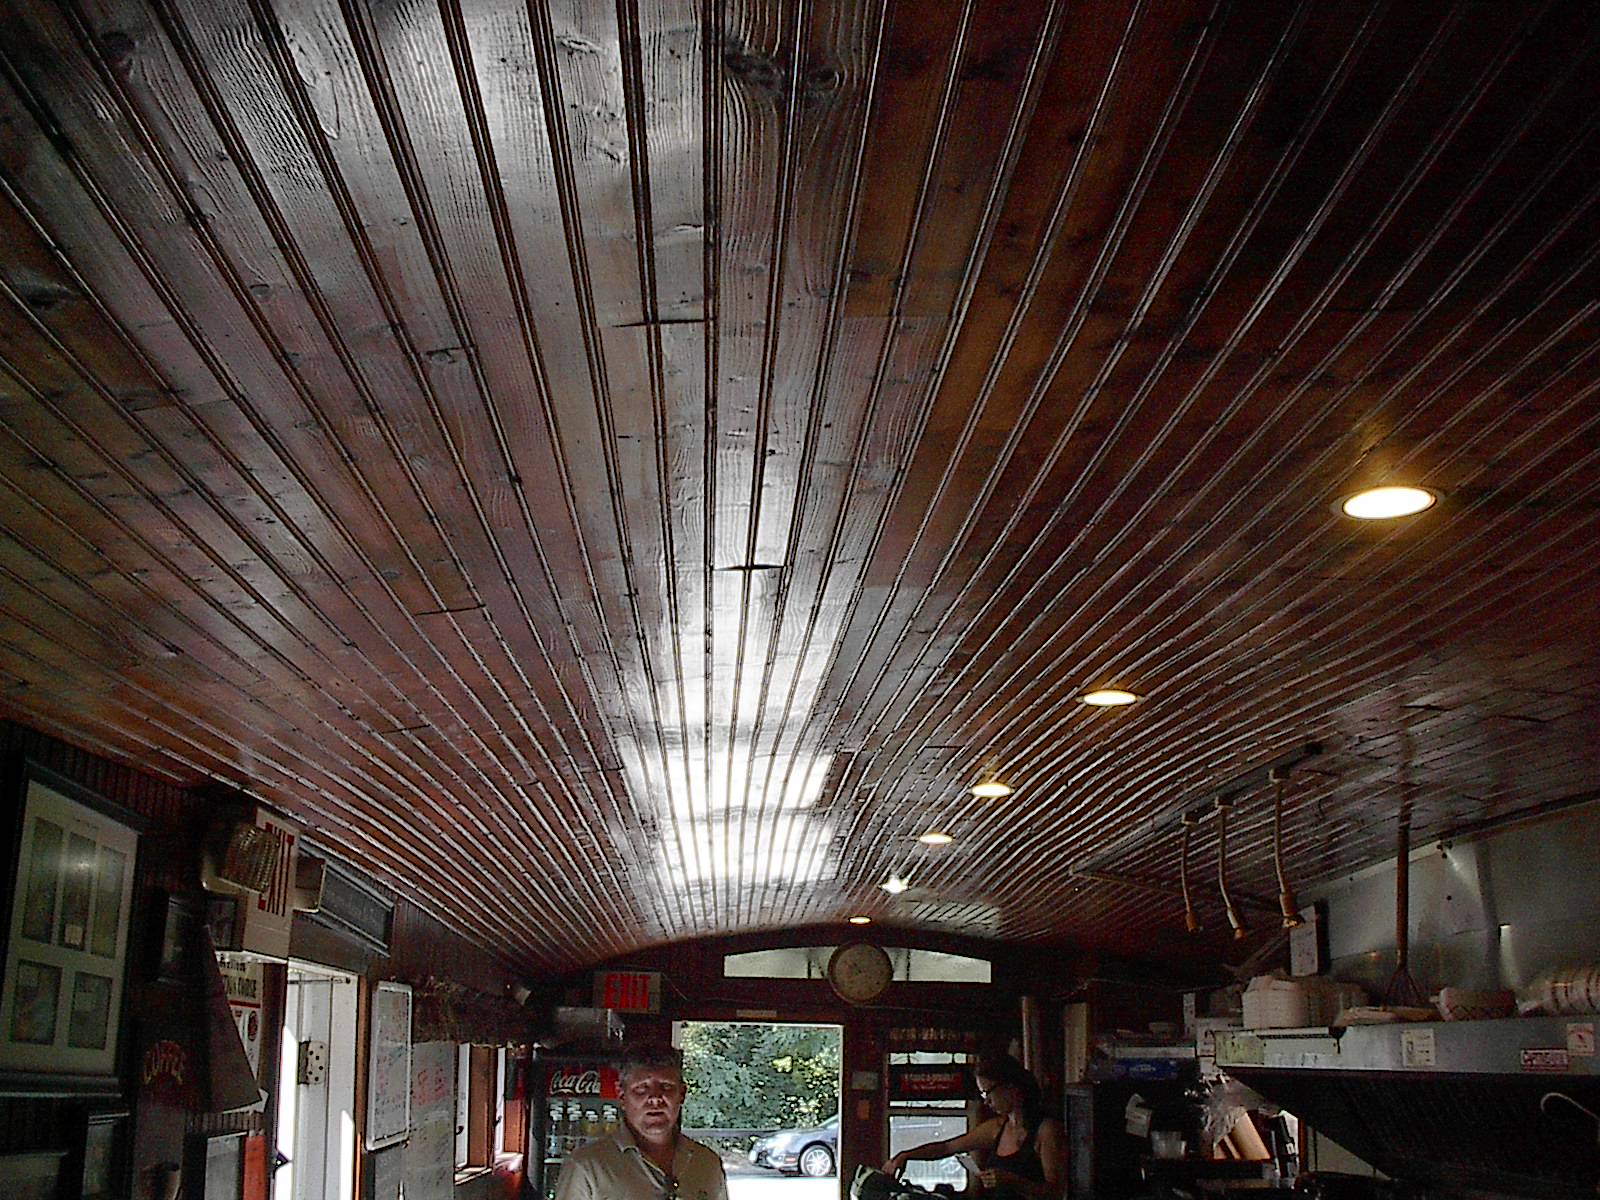 Winsted Diner - This now-old slat ceiling replaced the original braced metal ceiling.